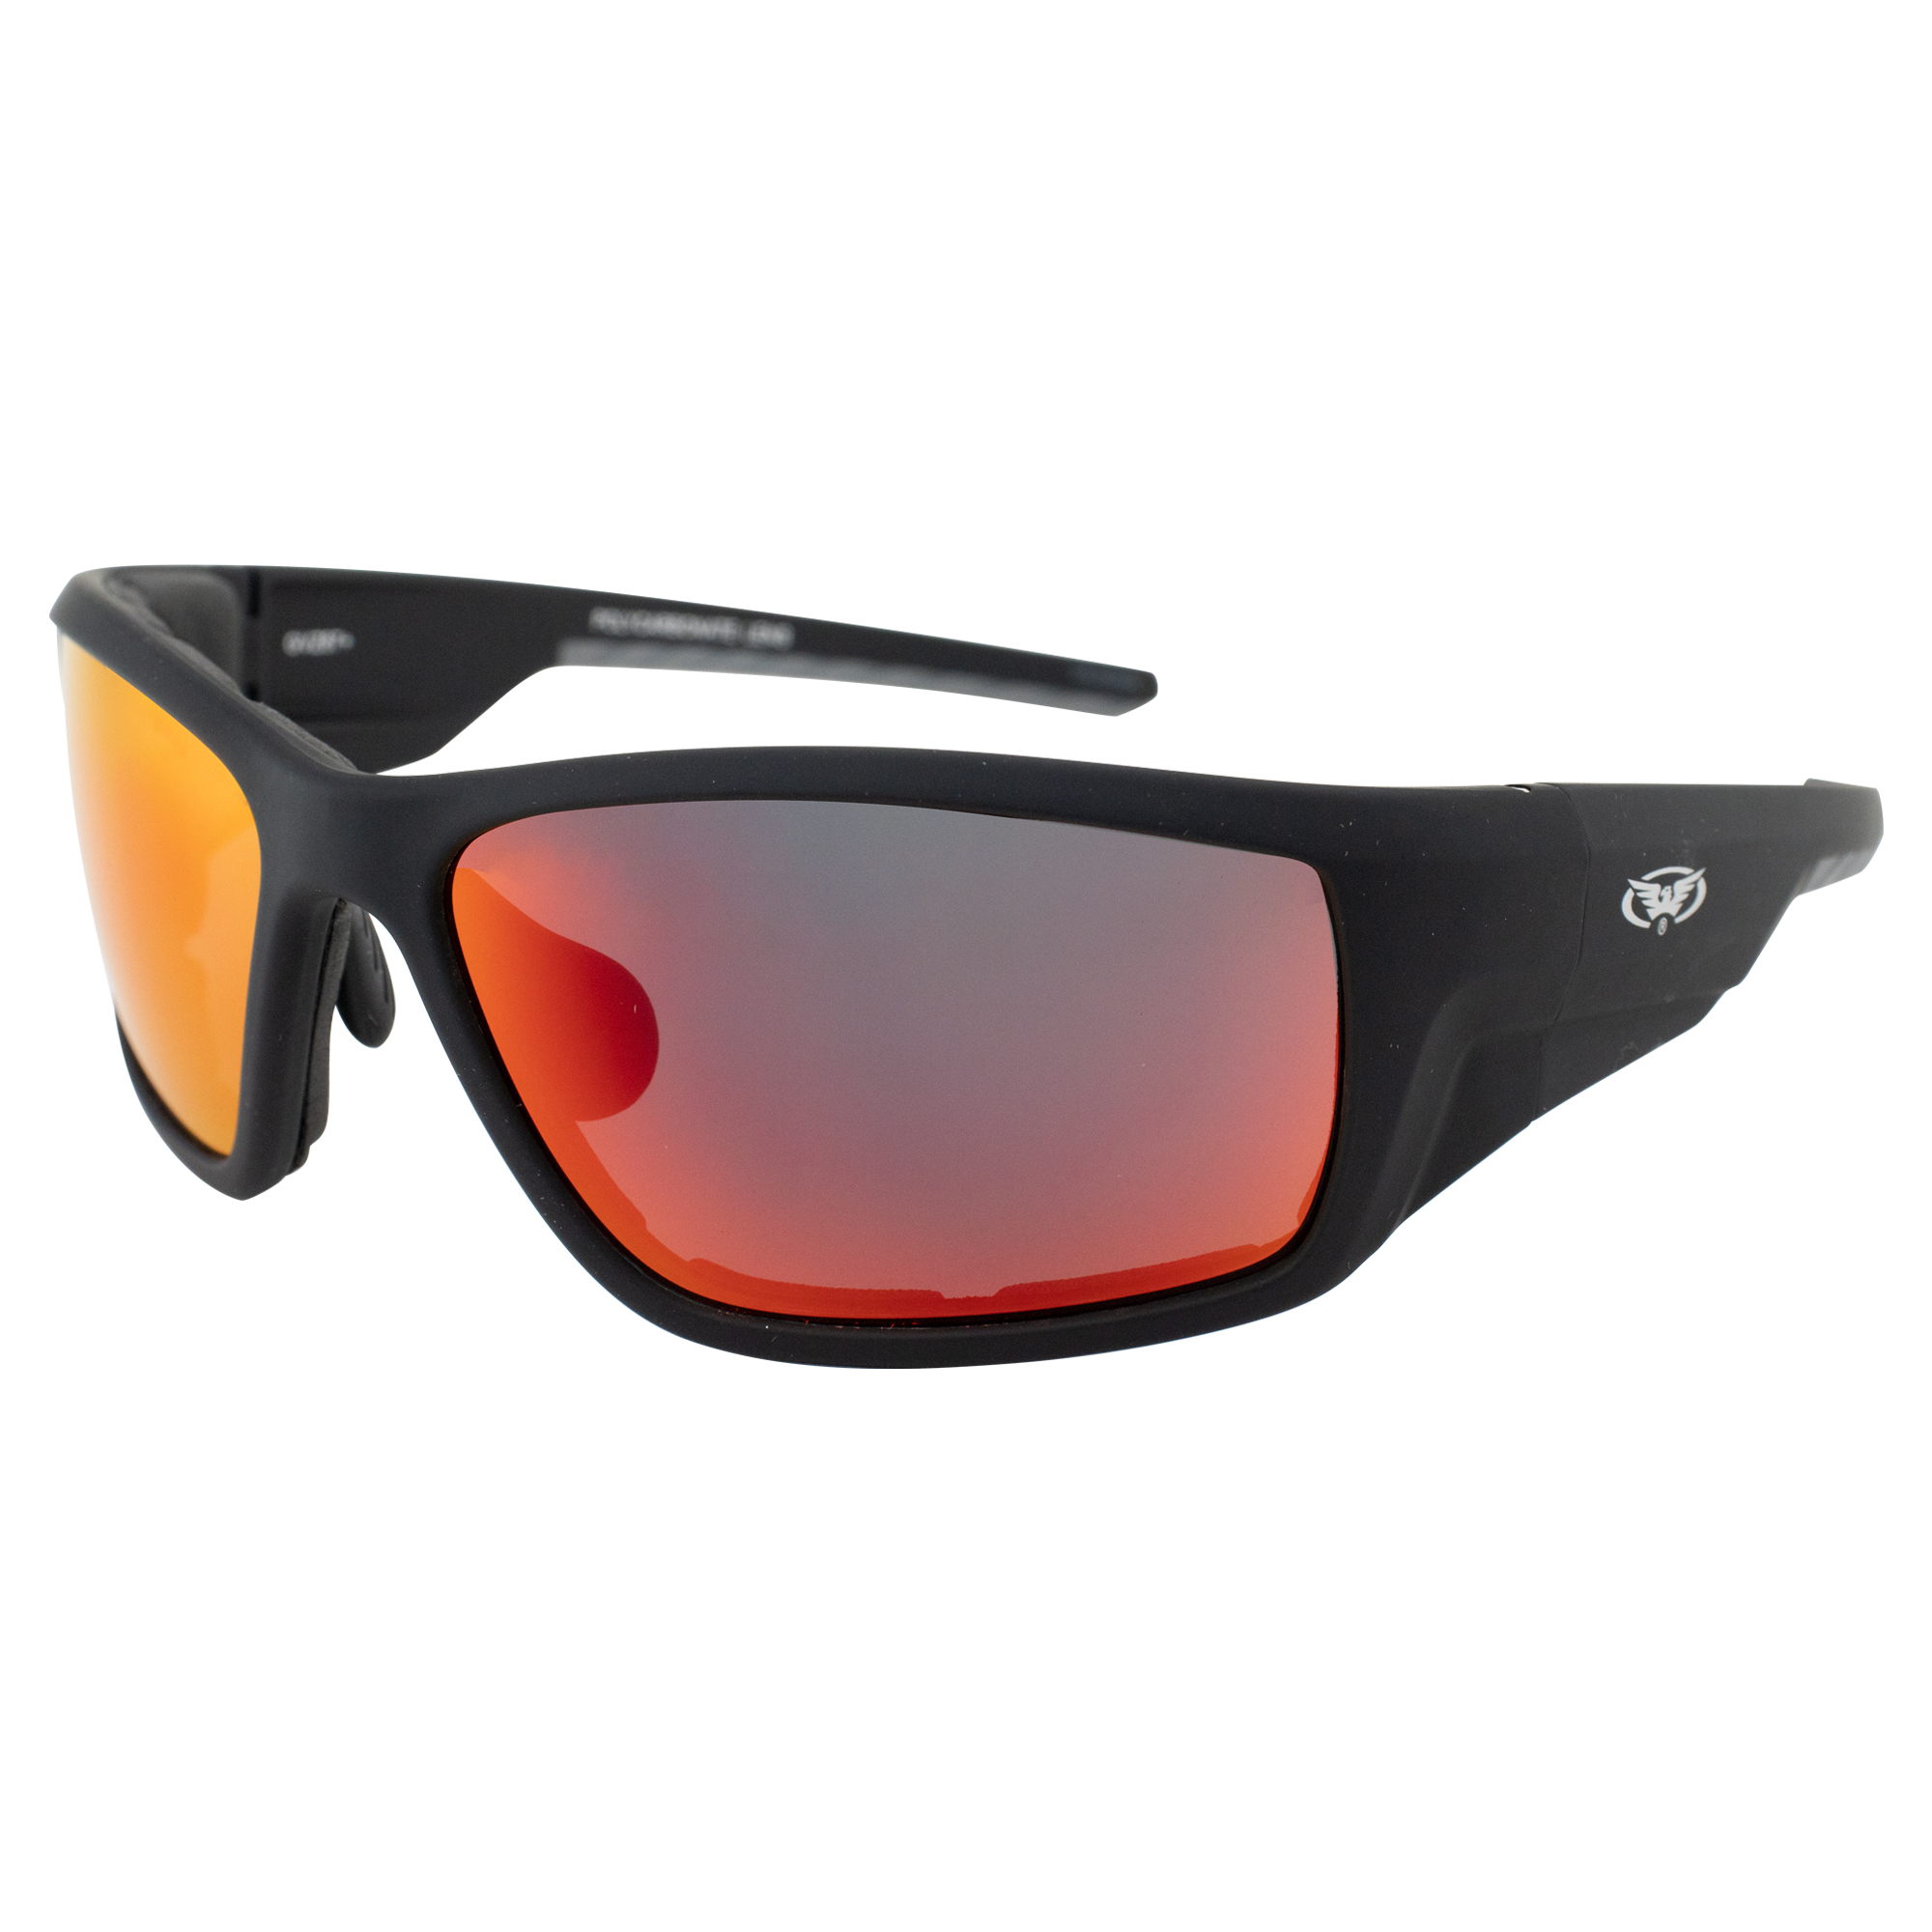 Global Vision Eyewear Kinetic Foam Padded Motorcycle Safety Sunglasses Soft Touch Black Frames with G-Tech Red Mirror Lenses - image 1 of 7